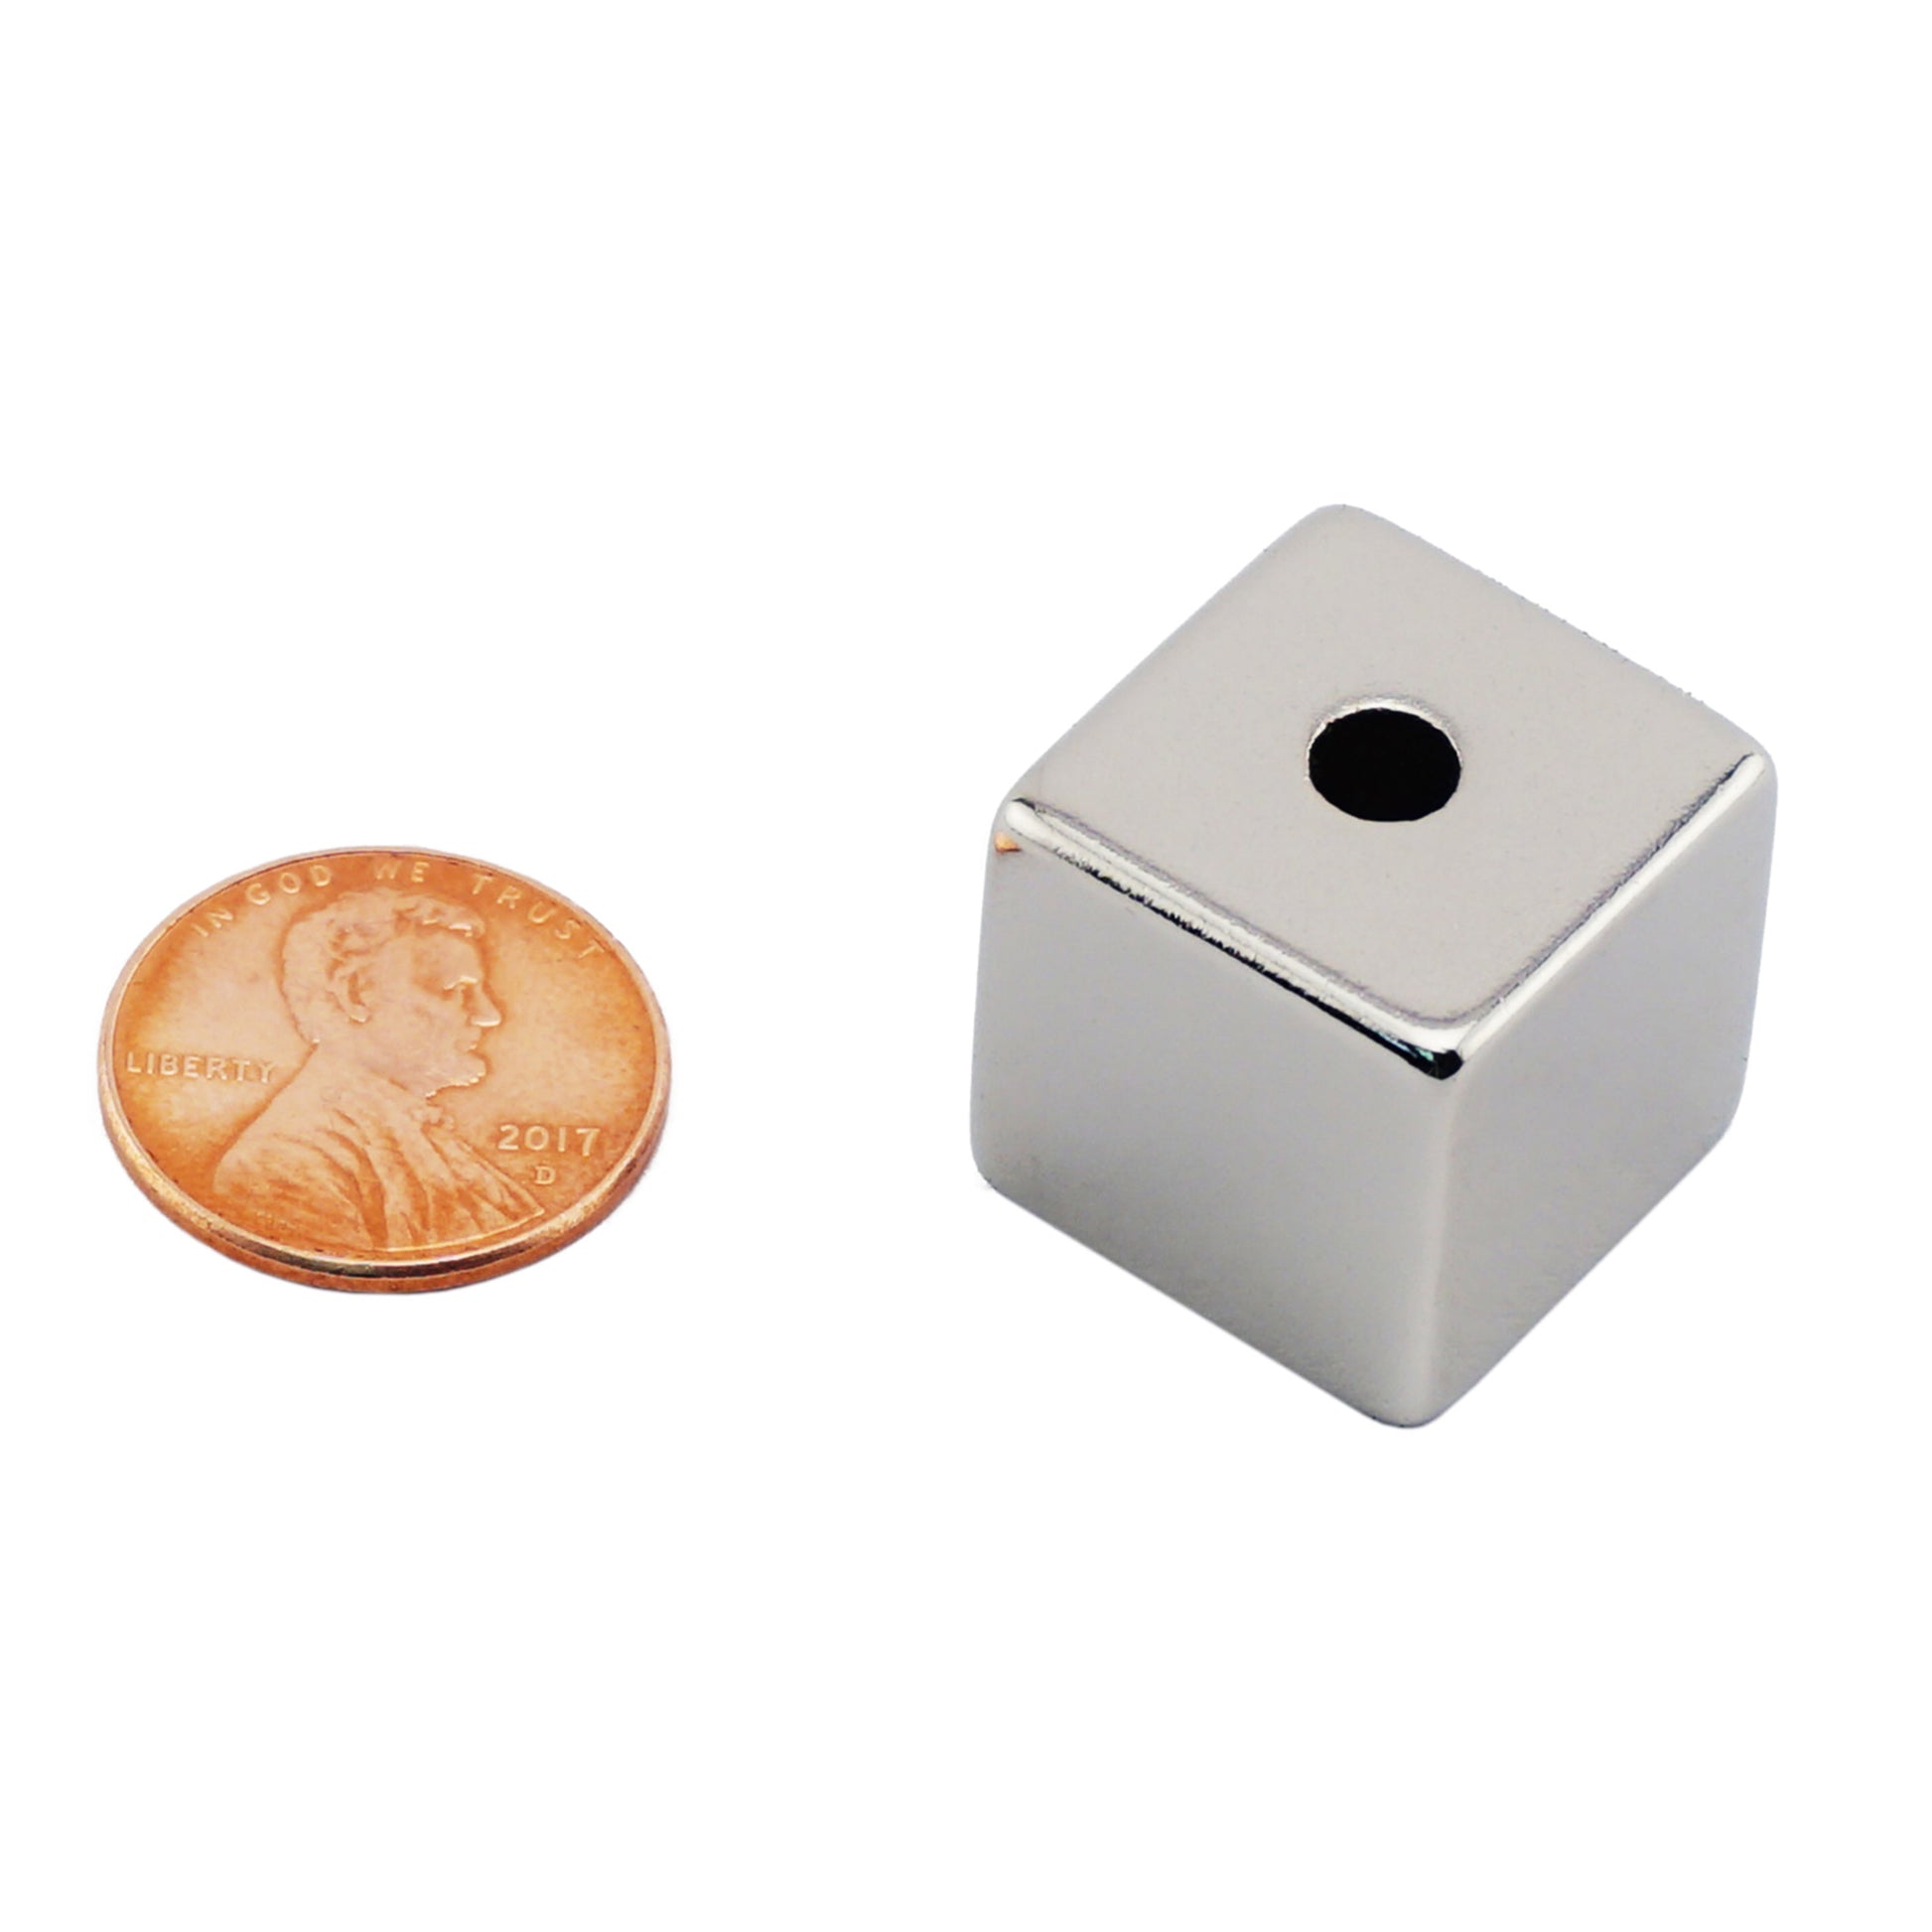 Load image into Gallery viewer, NB007502NS02 Neodymium Block Magnet with hole - Compared to Penny for Size Reference